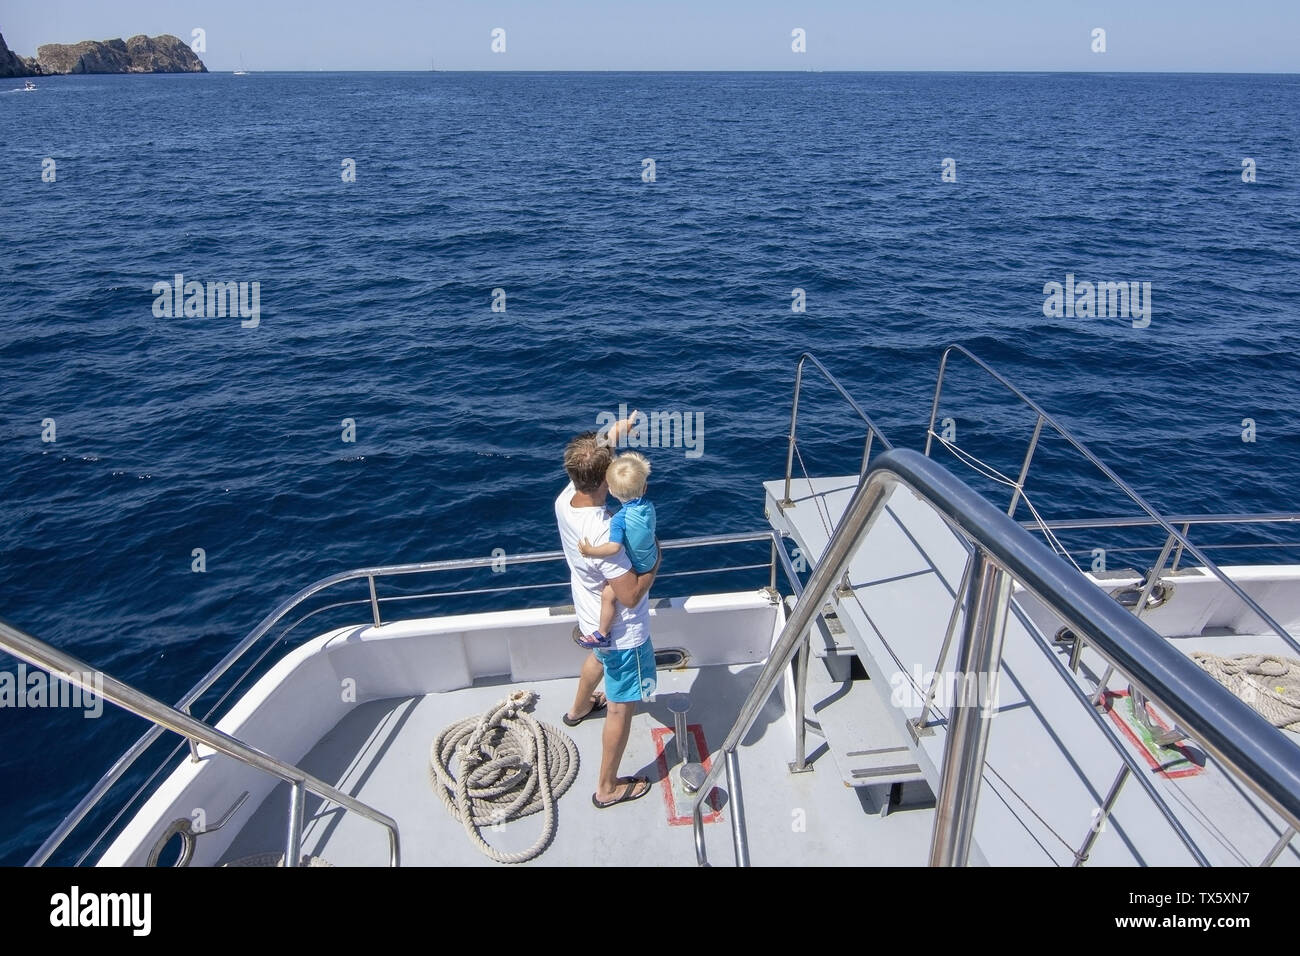 MALLORCA, SPAIN - JUNE 23, 2019: Father and child on tourboat Tropical with Cruceros Cormoran on a sunny day at sea on June 23, 2019 in Mallorca, Spai Stock Photo